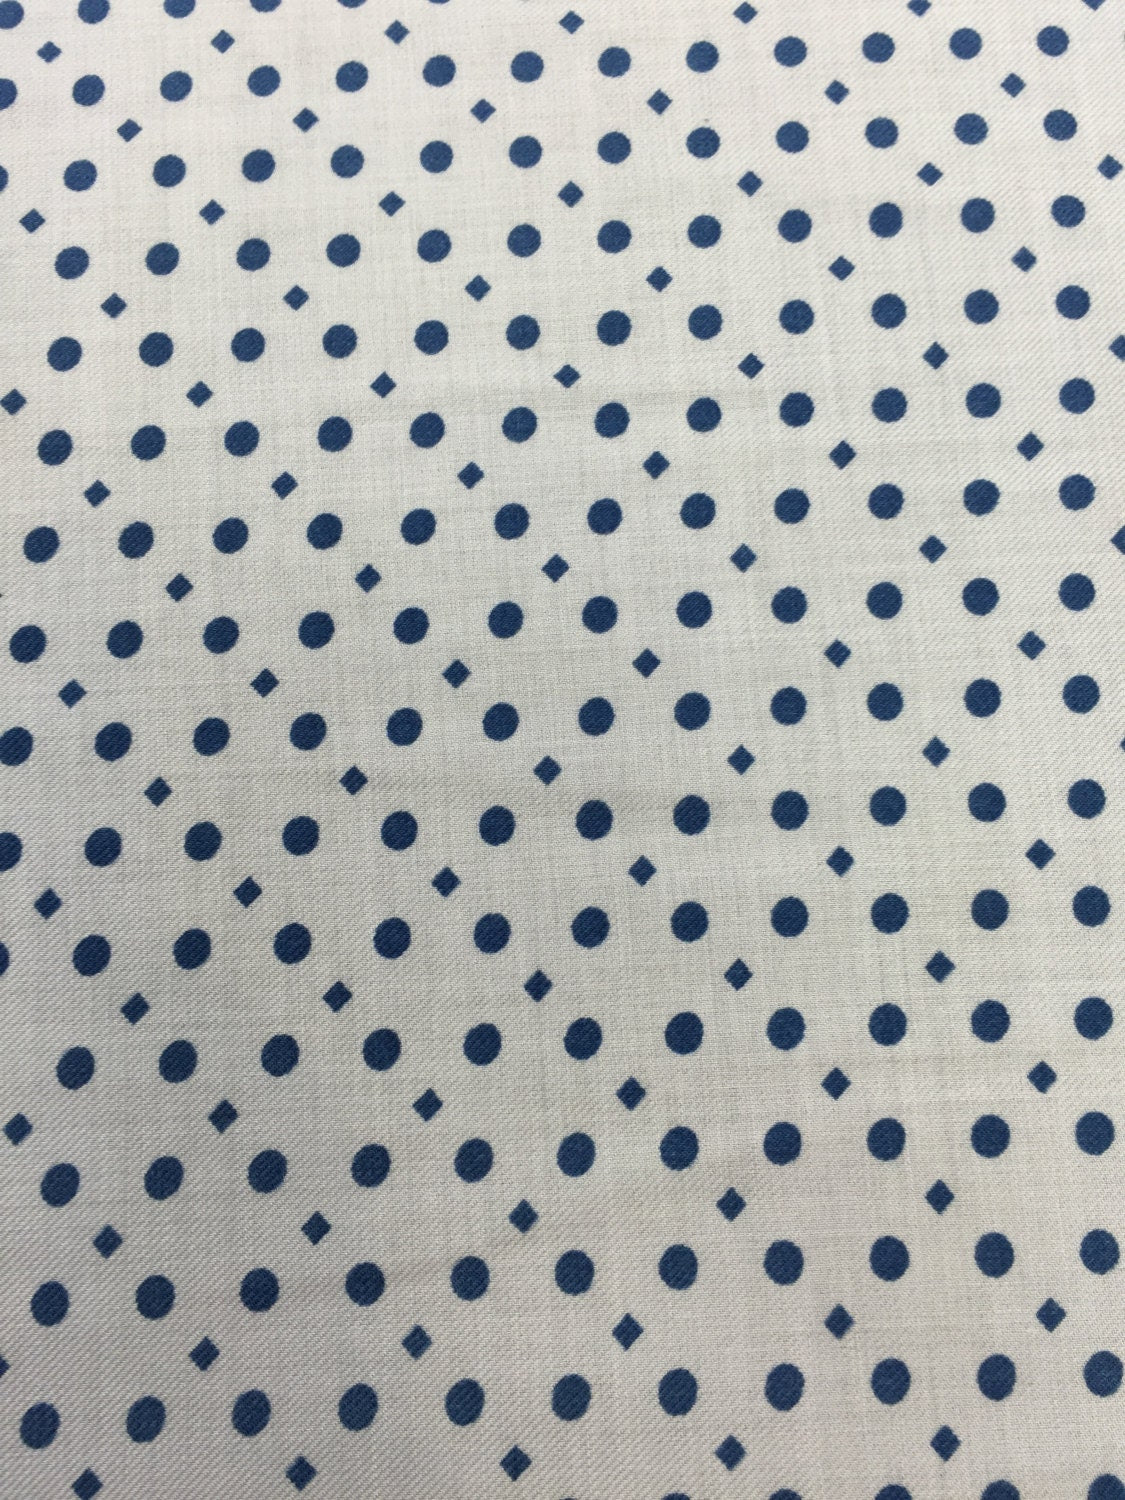 100% rayon challis. Blue dots n diamonds Off white background fabric sold by the yard soft organic kids dress draping clothing decoration